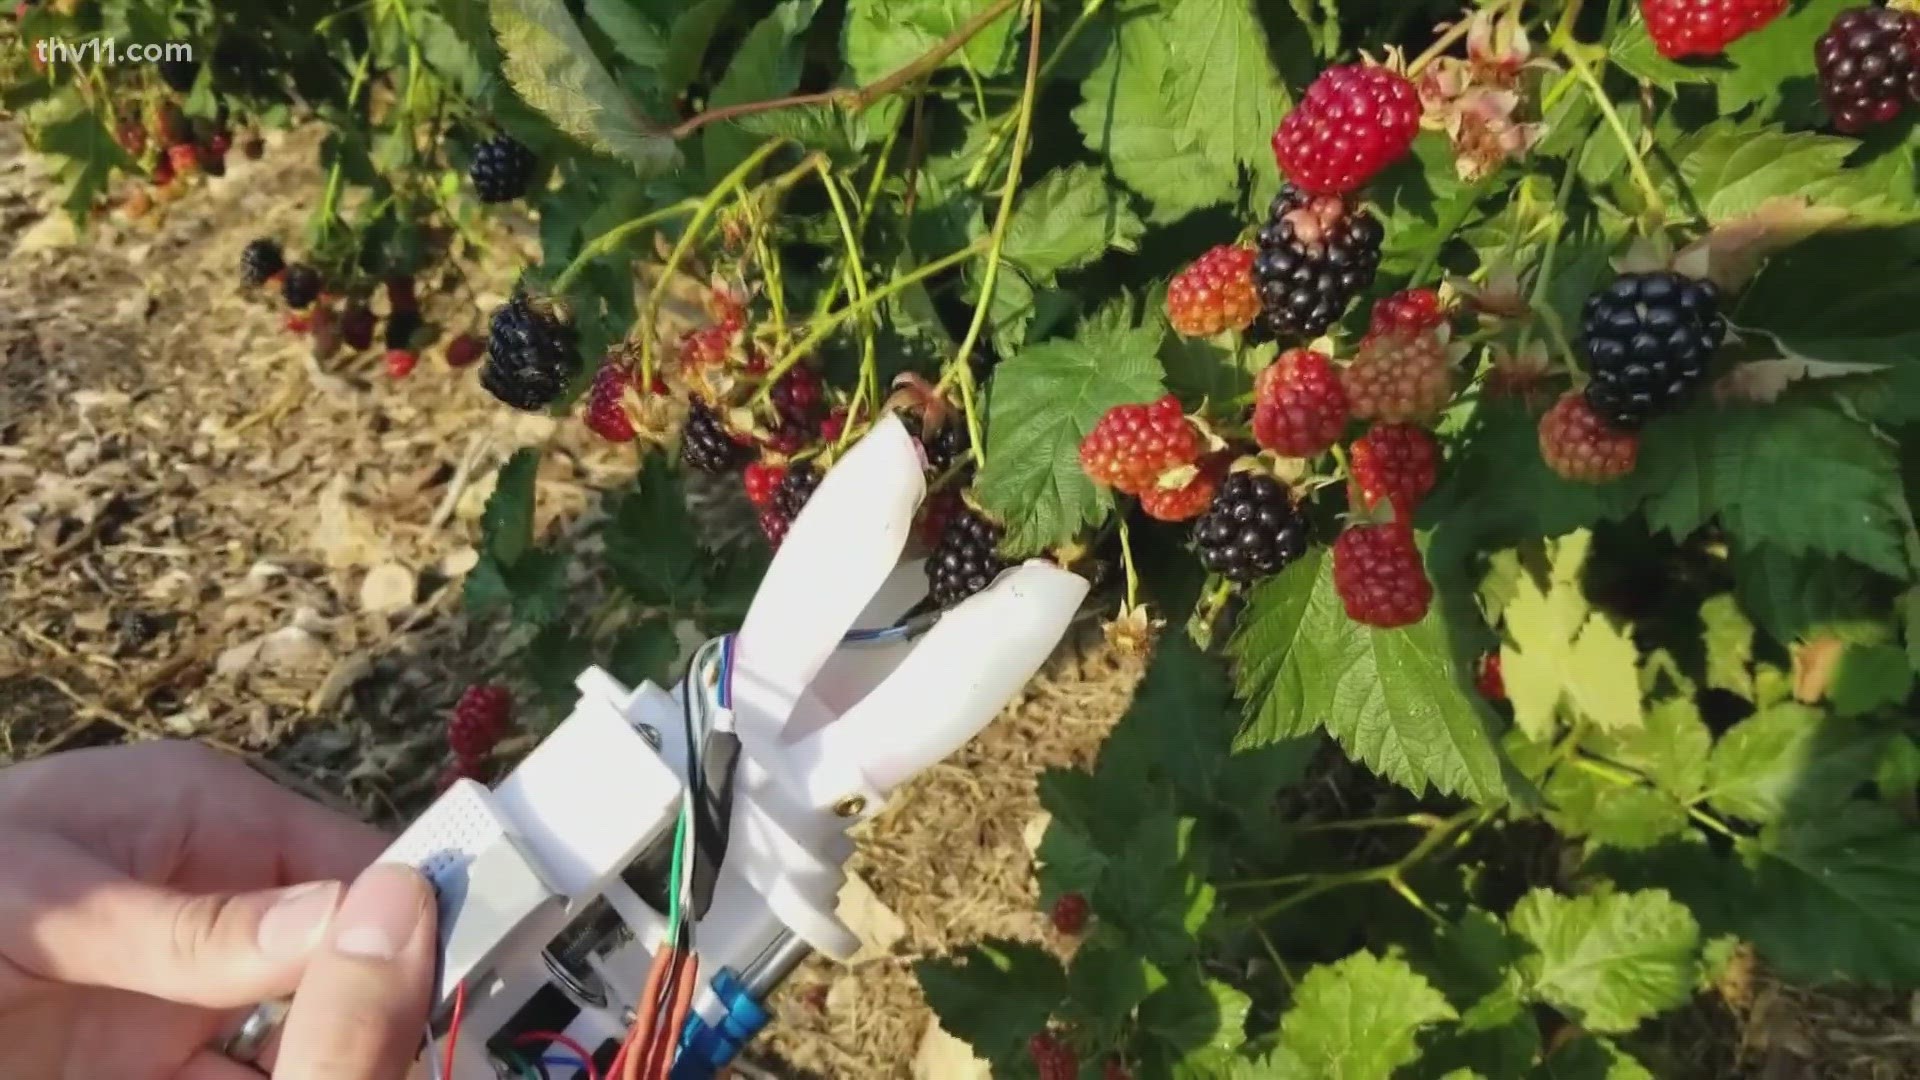 Lance Turner presents Arkansas's top business stories for May 22, 2023, including the development of a robot that picks blackberries.